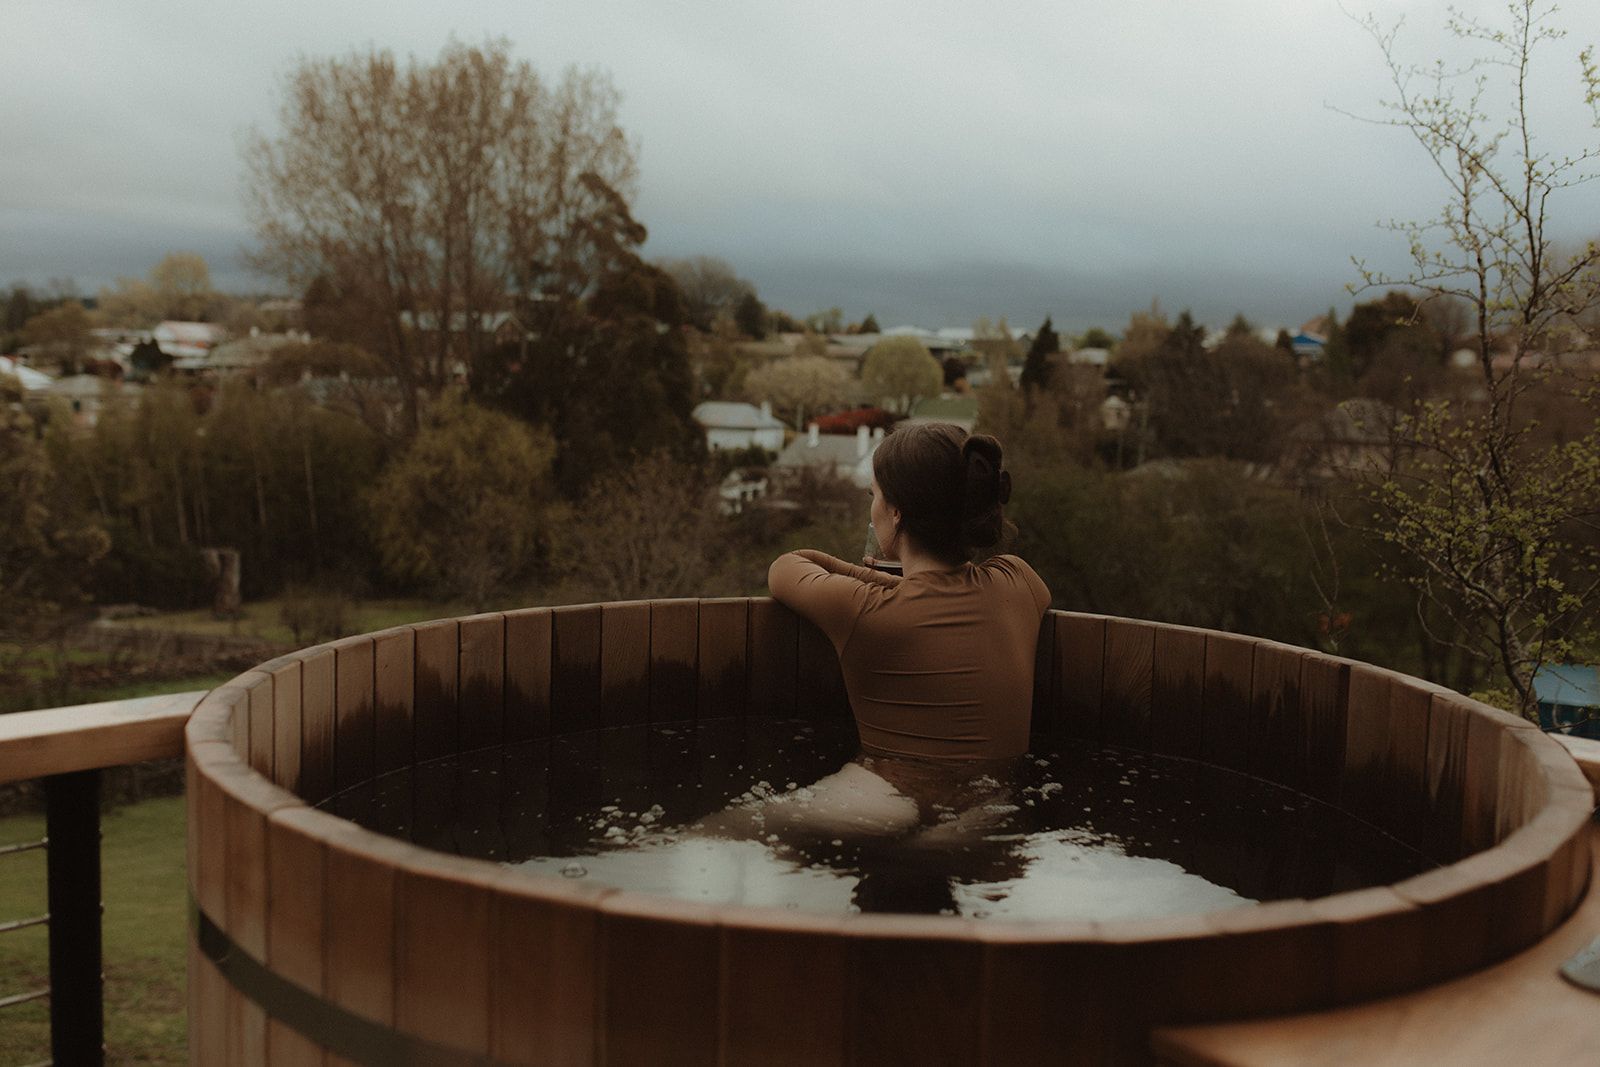 The Eco Cabin Tasmania by Wild Life Environmental. View of Cedar Hot tub looking out at view of tasmanian landscape